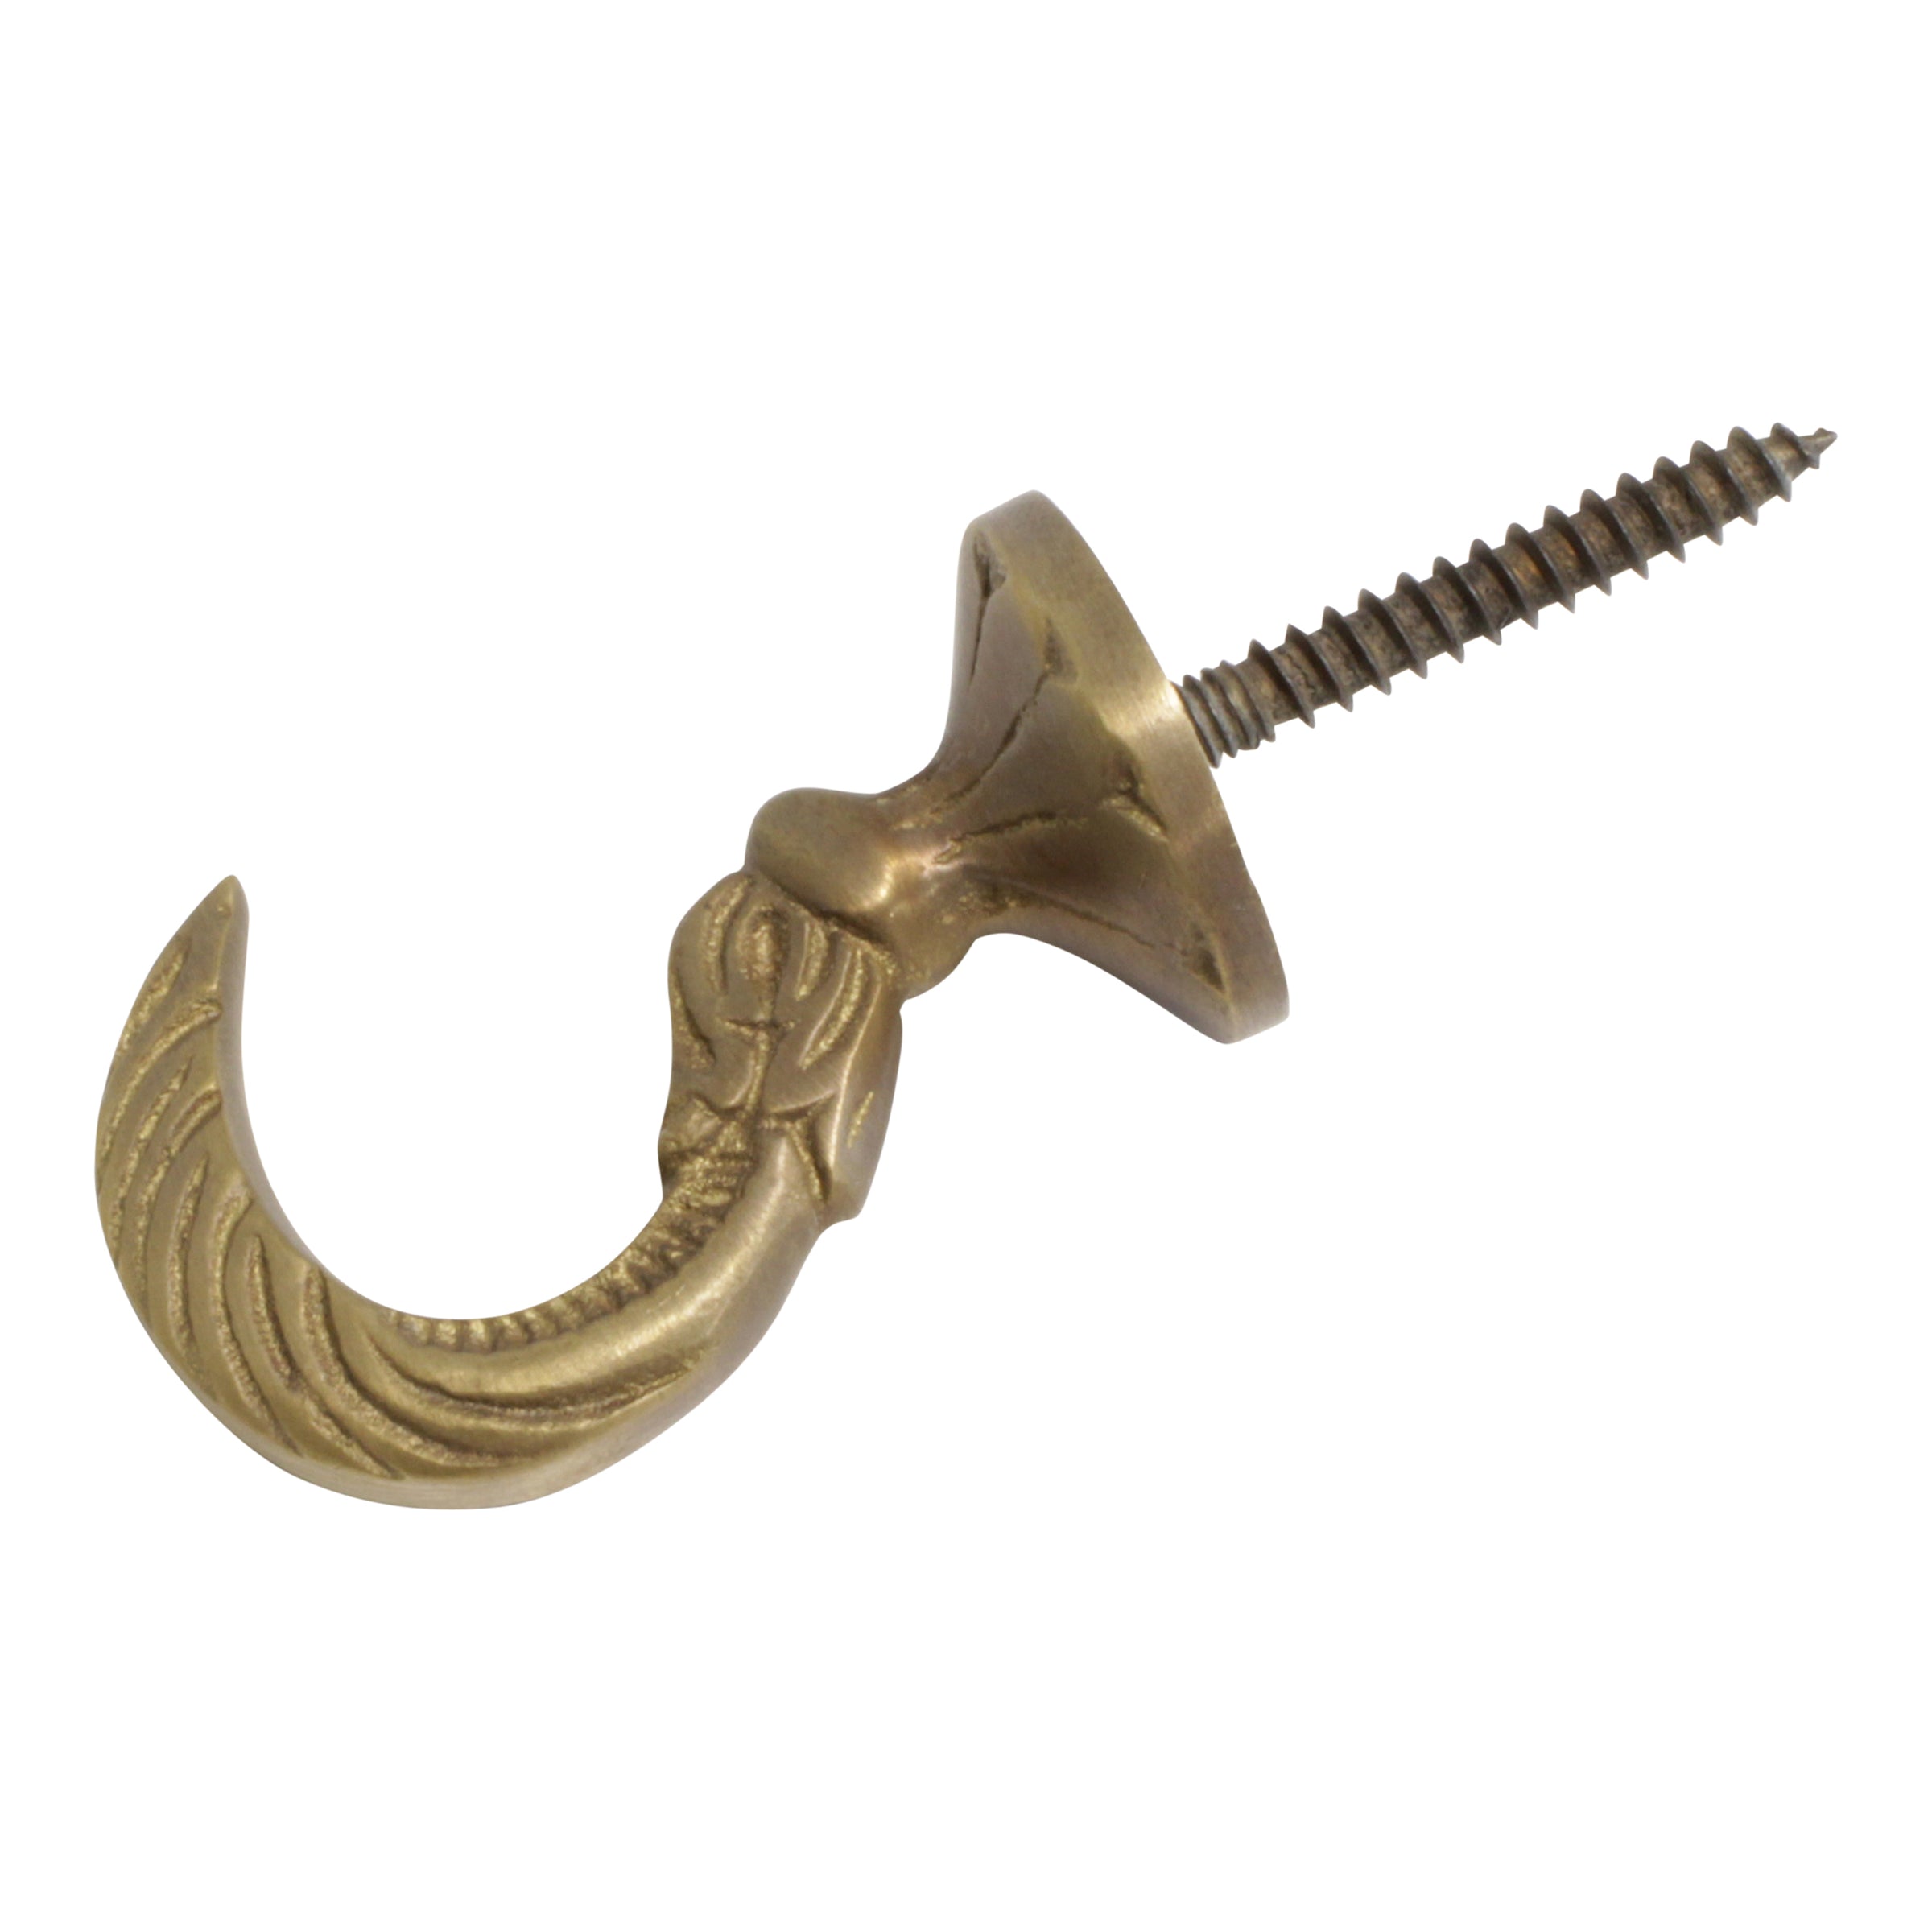 RCH Hardware Hk-br2579-45 Brass Wall Hook, 1.8 inch, Polished Brass, Gold